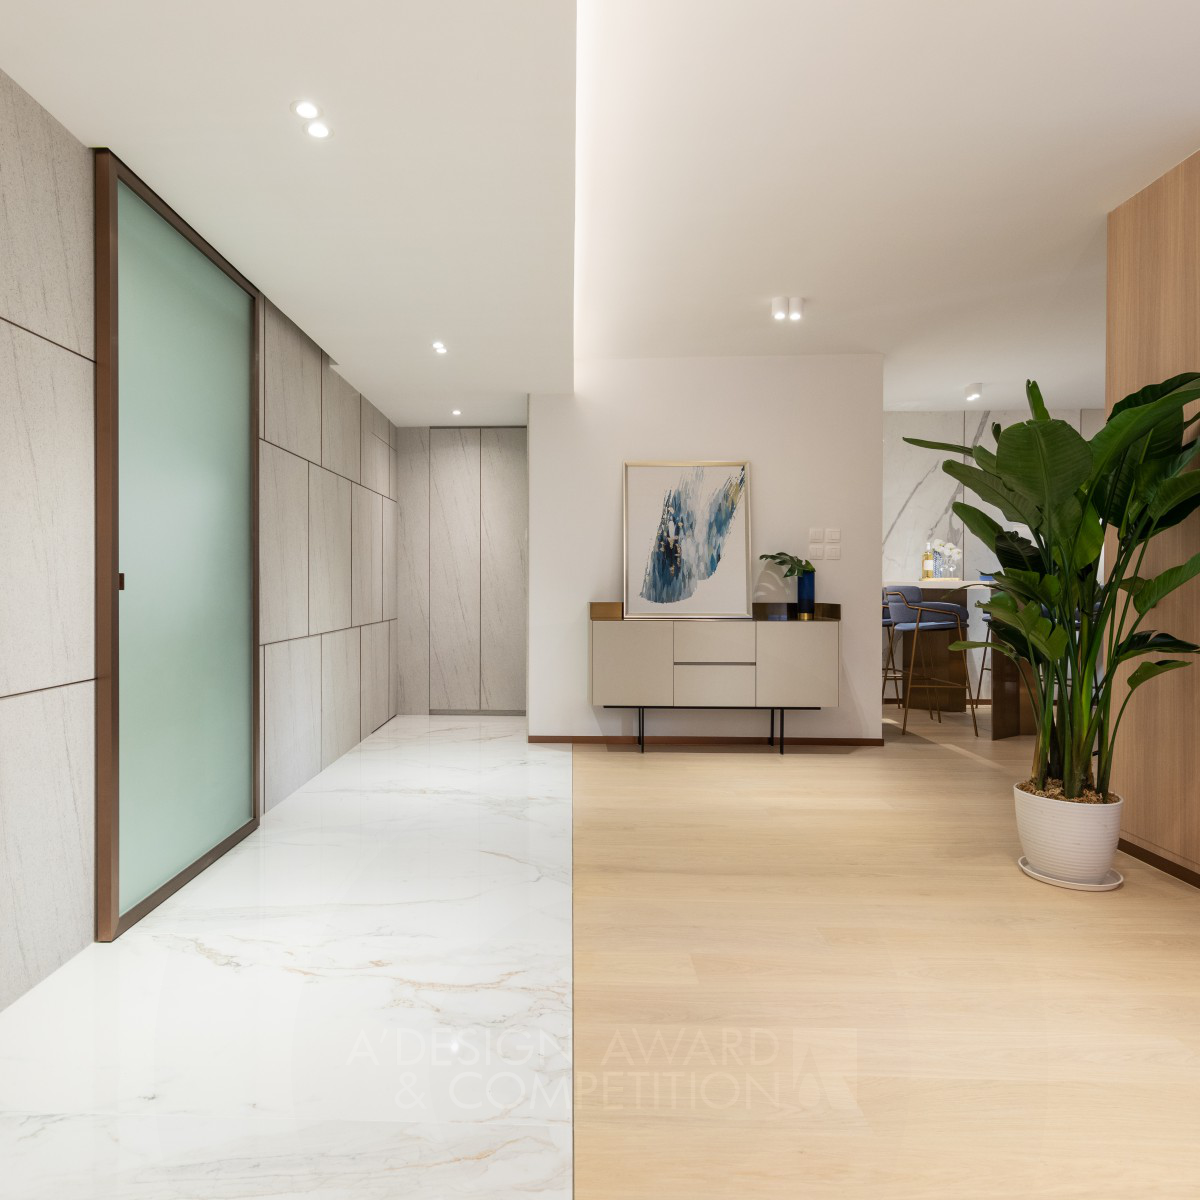 Andy Wan Residential Interior Design